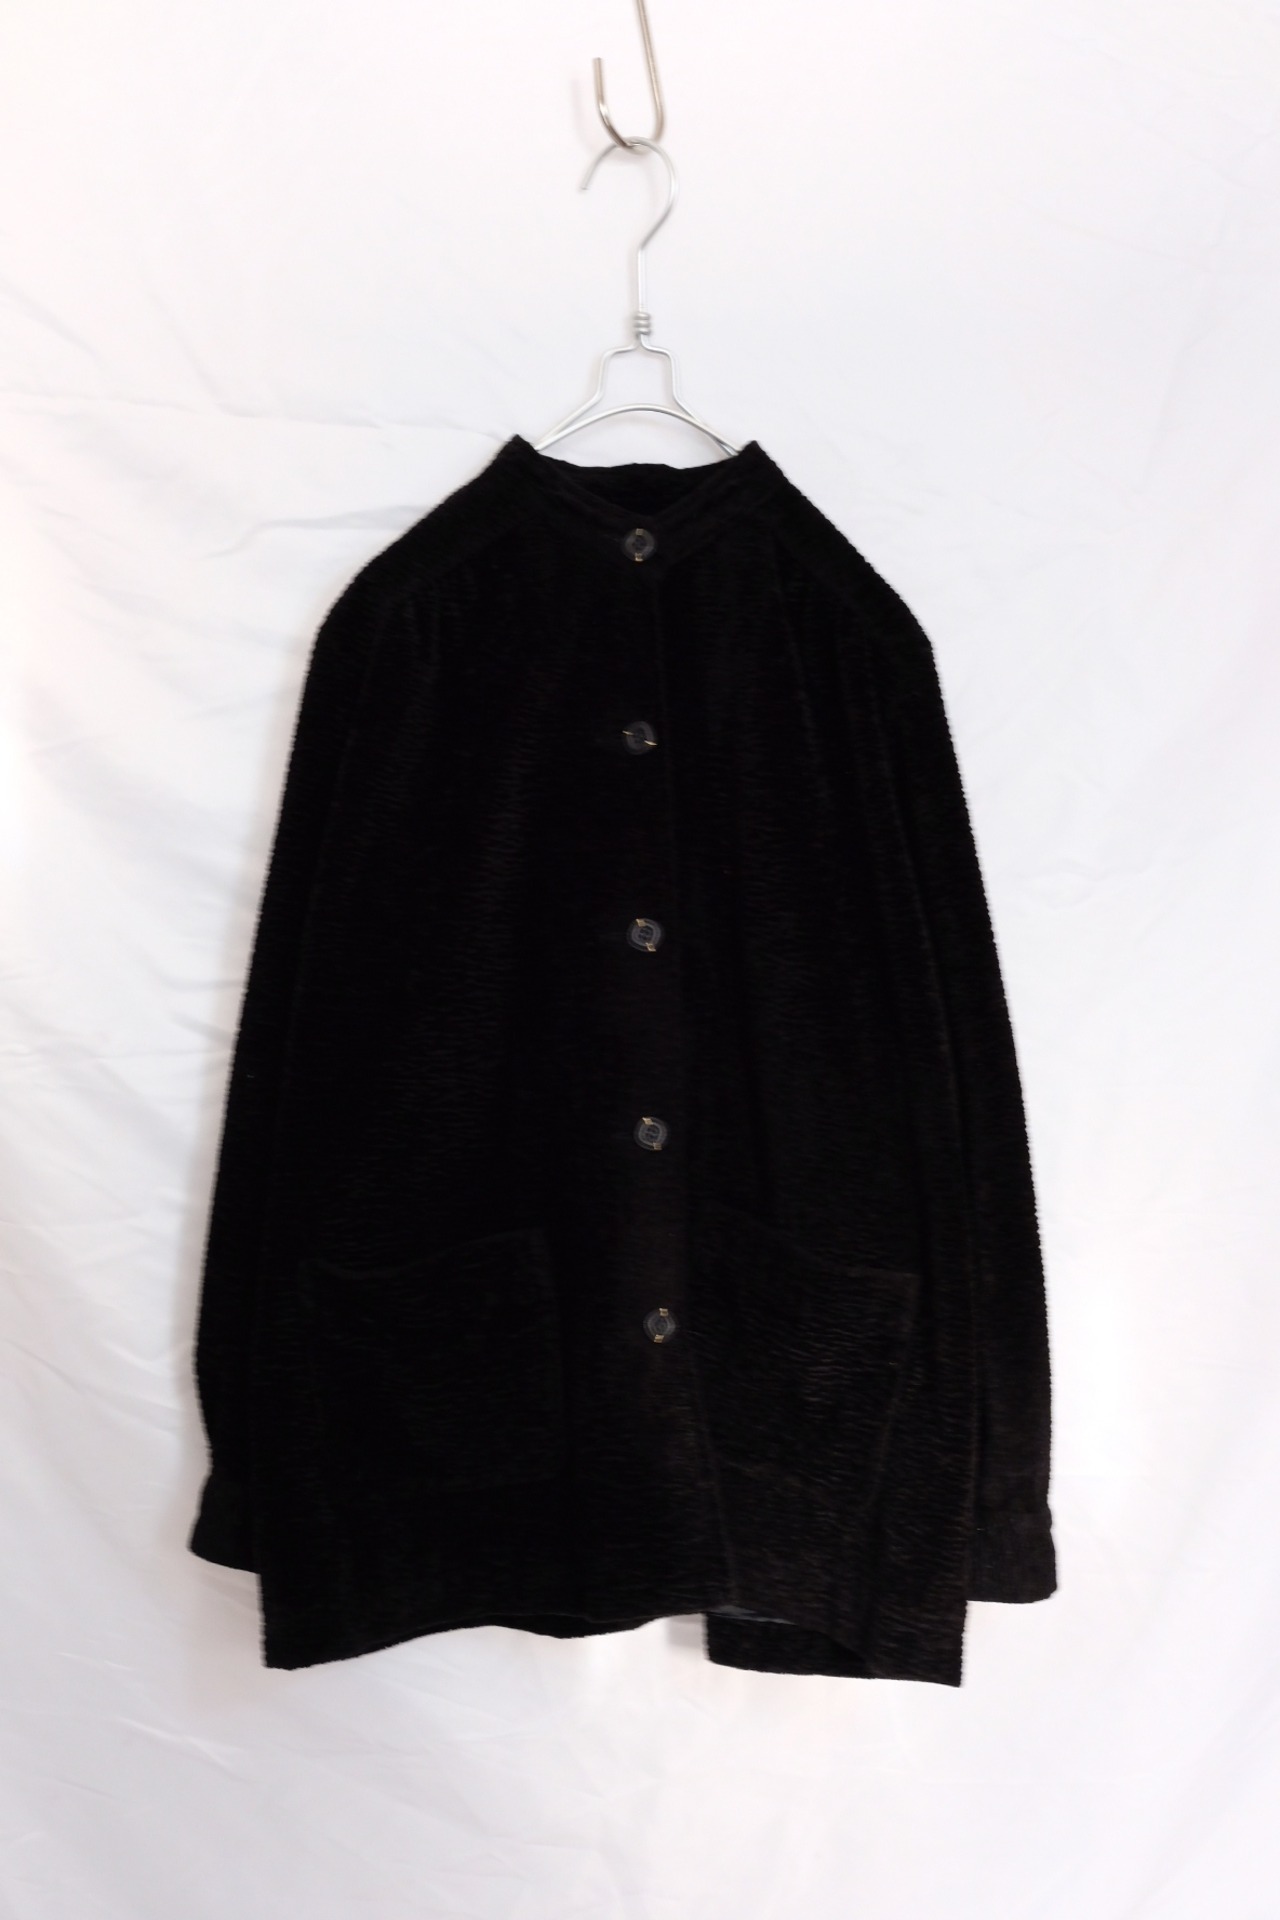 Stand collar jacket